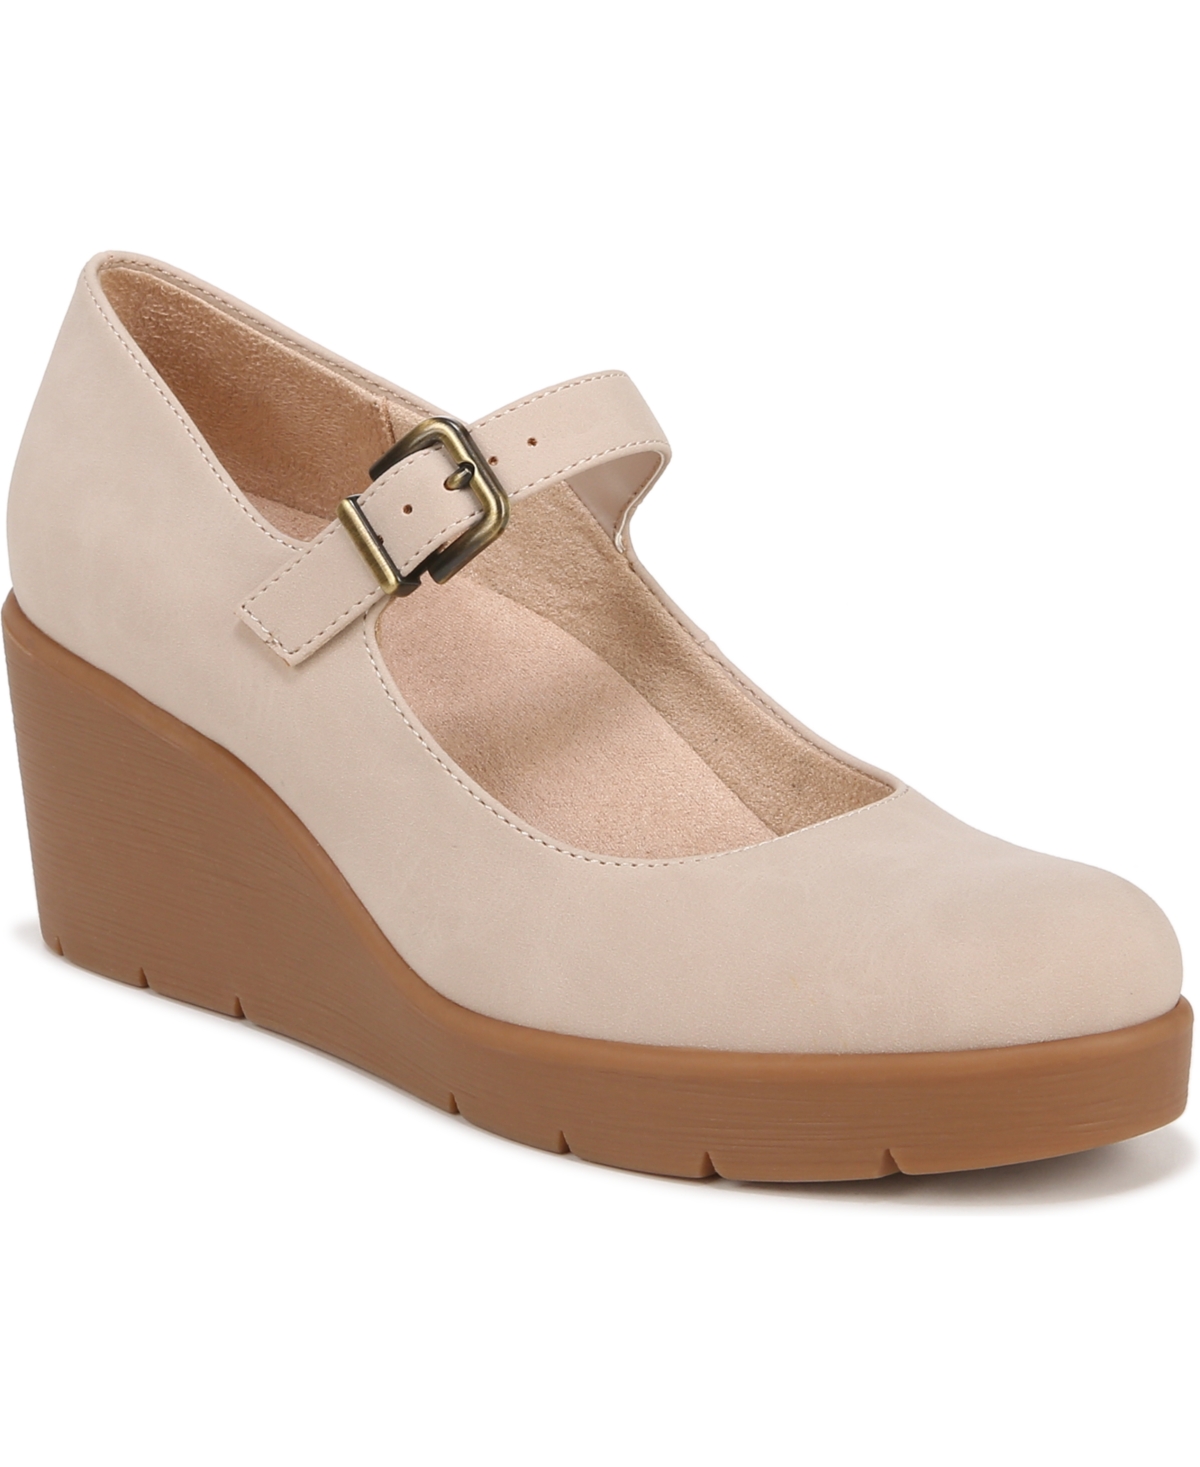 Adore Mary Jane Wedges - Porcelain Faux Leather